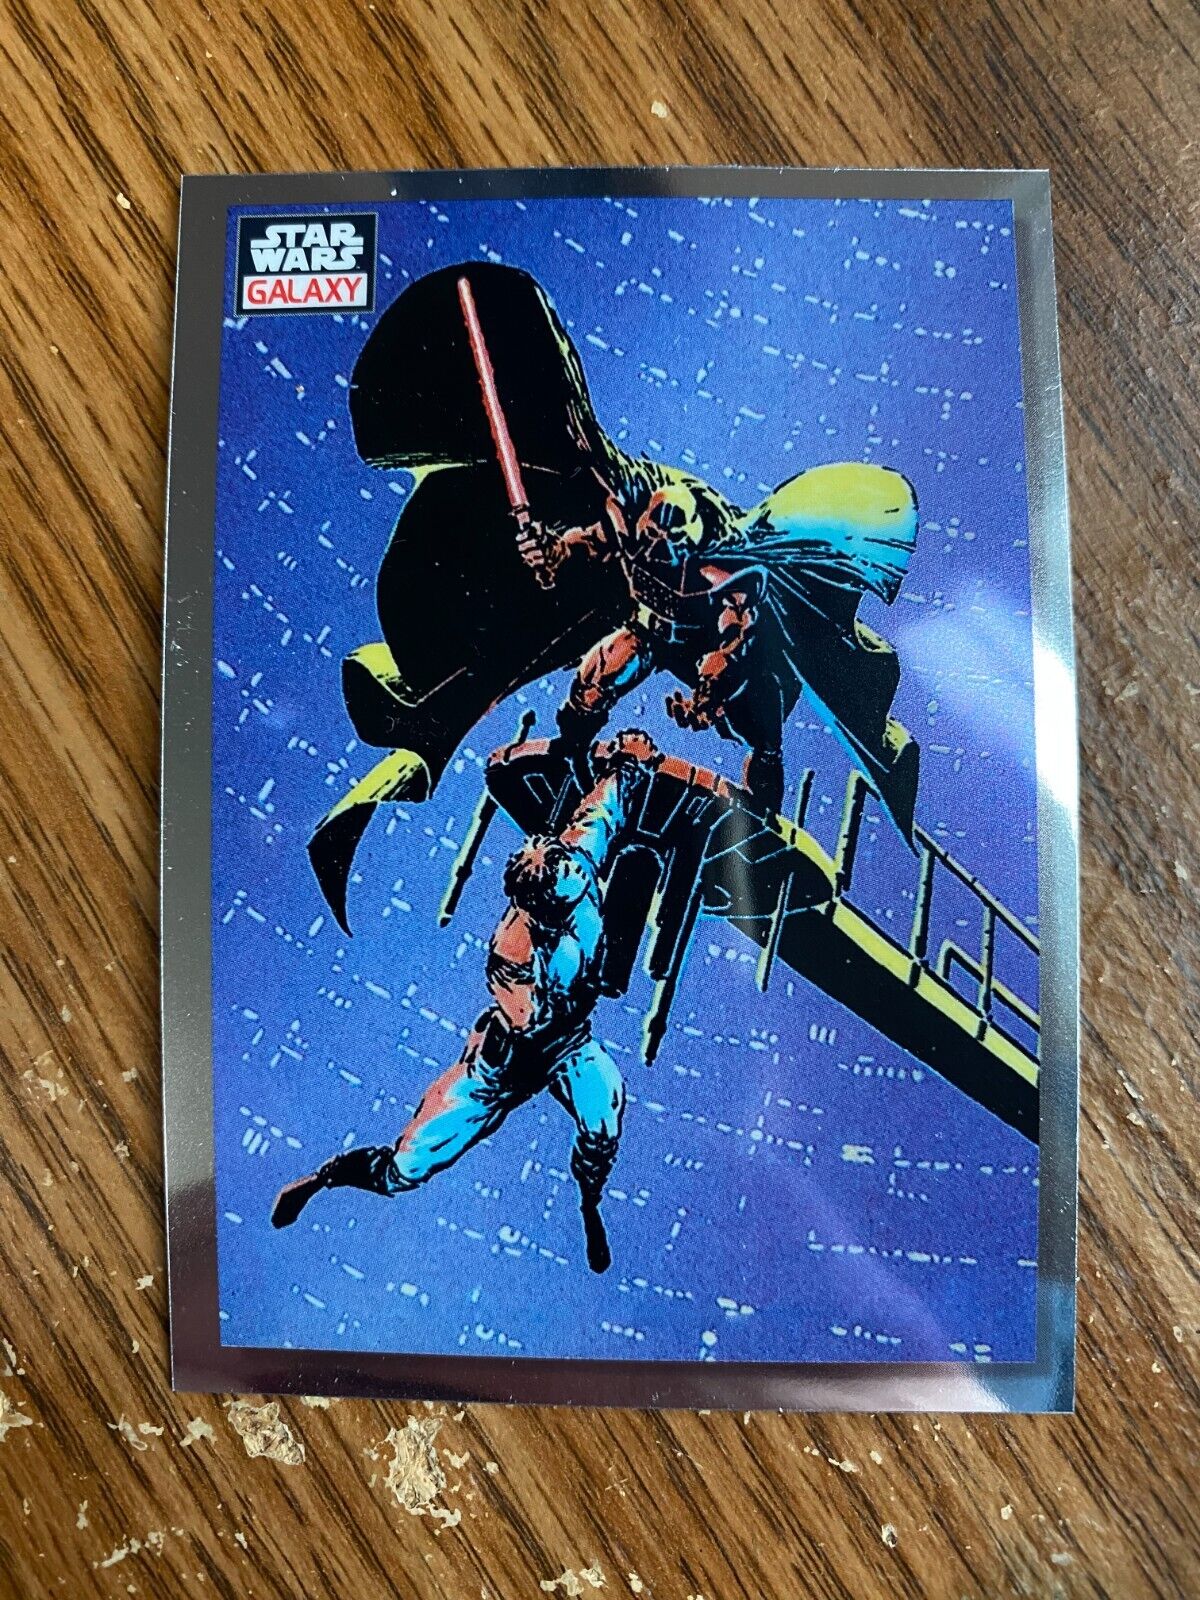 2023 Topps Chrome Star Wars Galaxy COMPLETE YOUR SET Base Card #1-100 (YOU PICK)